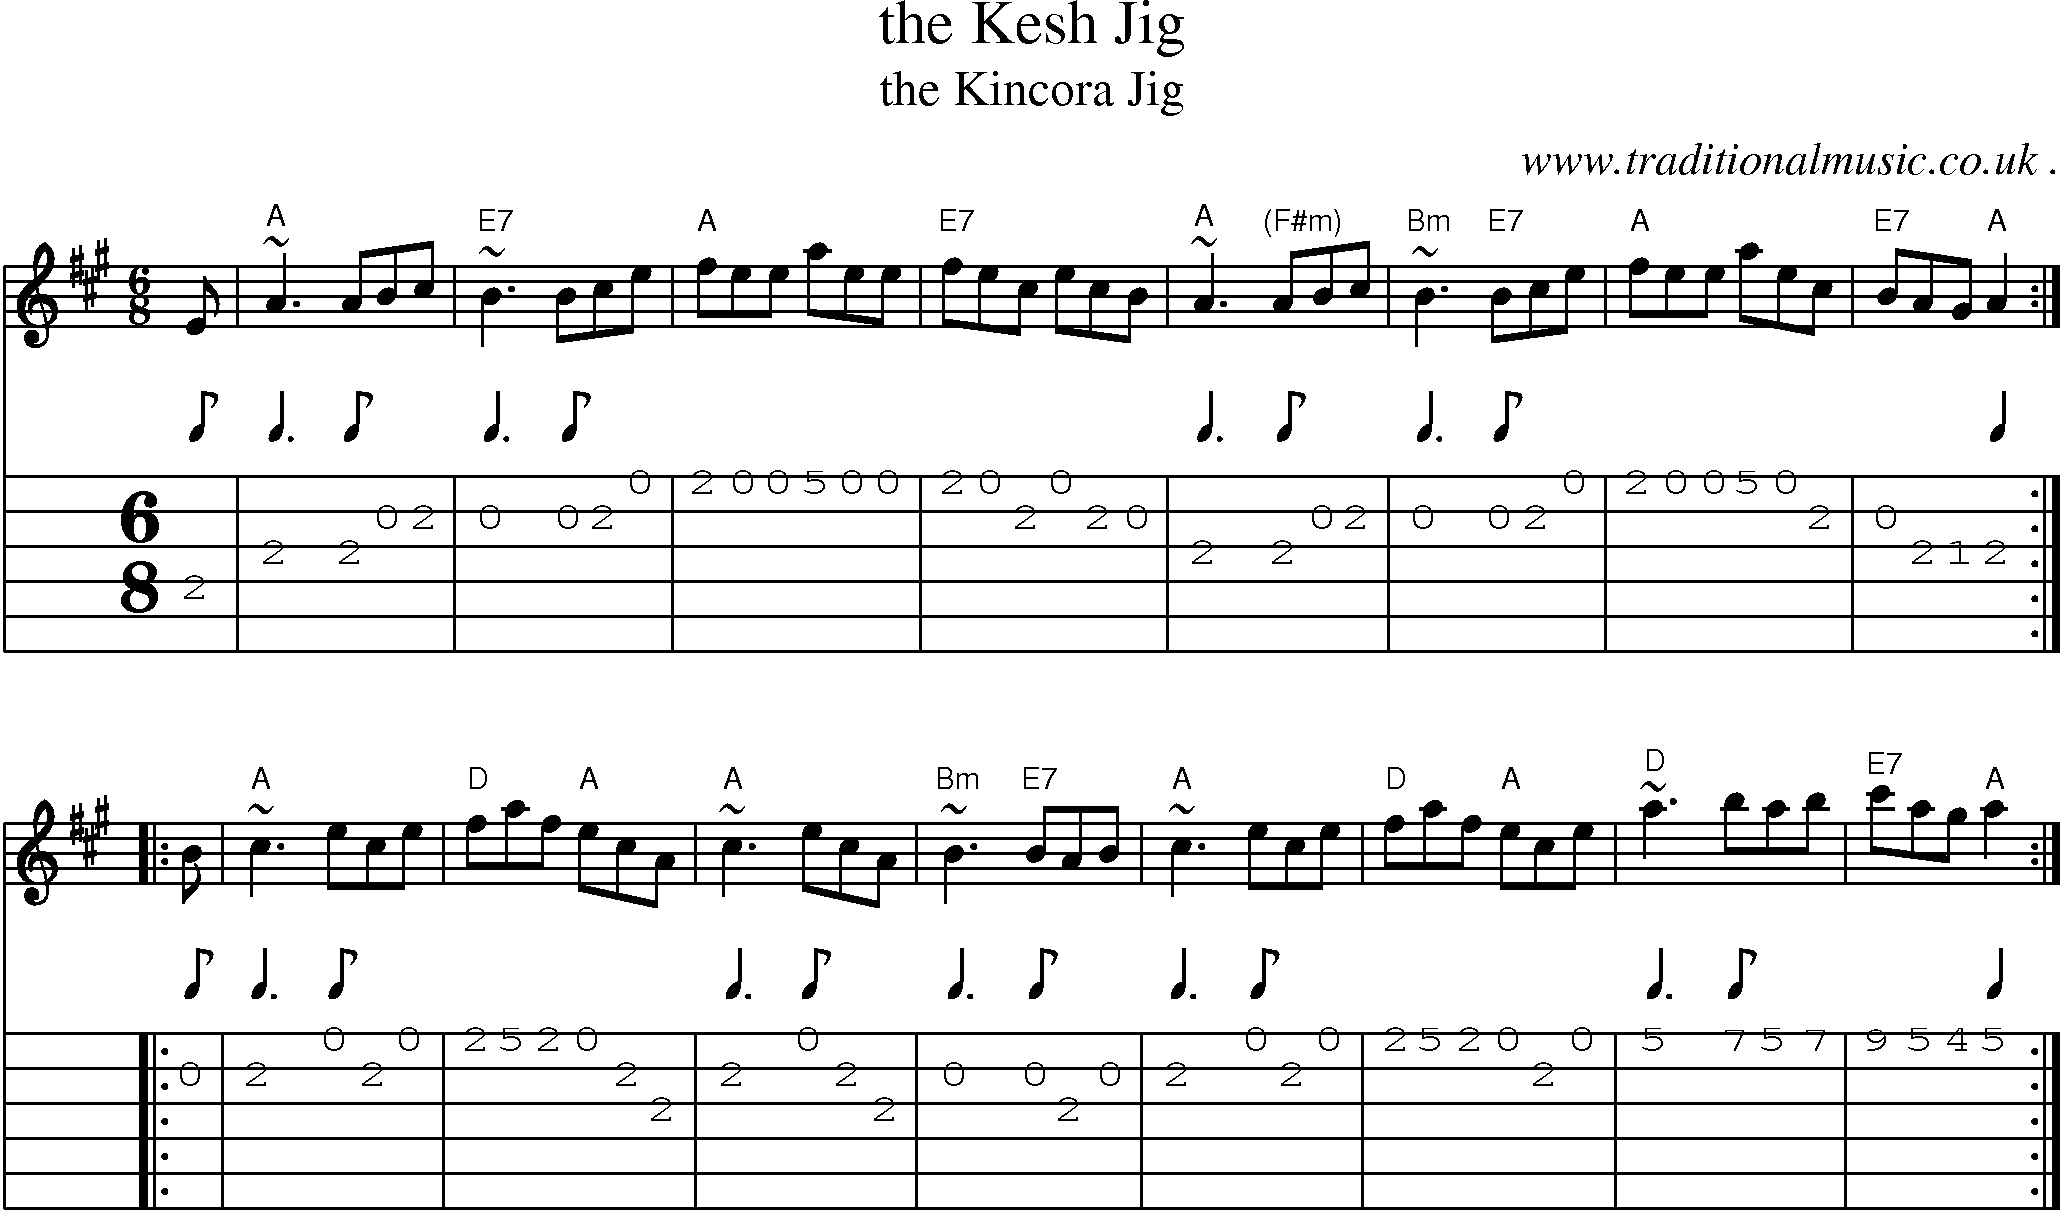 Sheet-music  score, Chords and Guitar Tabs for The Kesh Jig